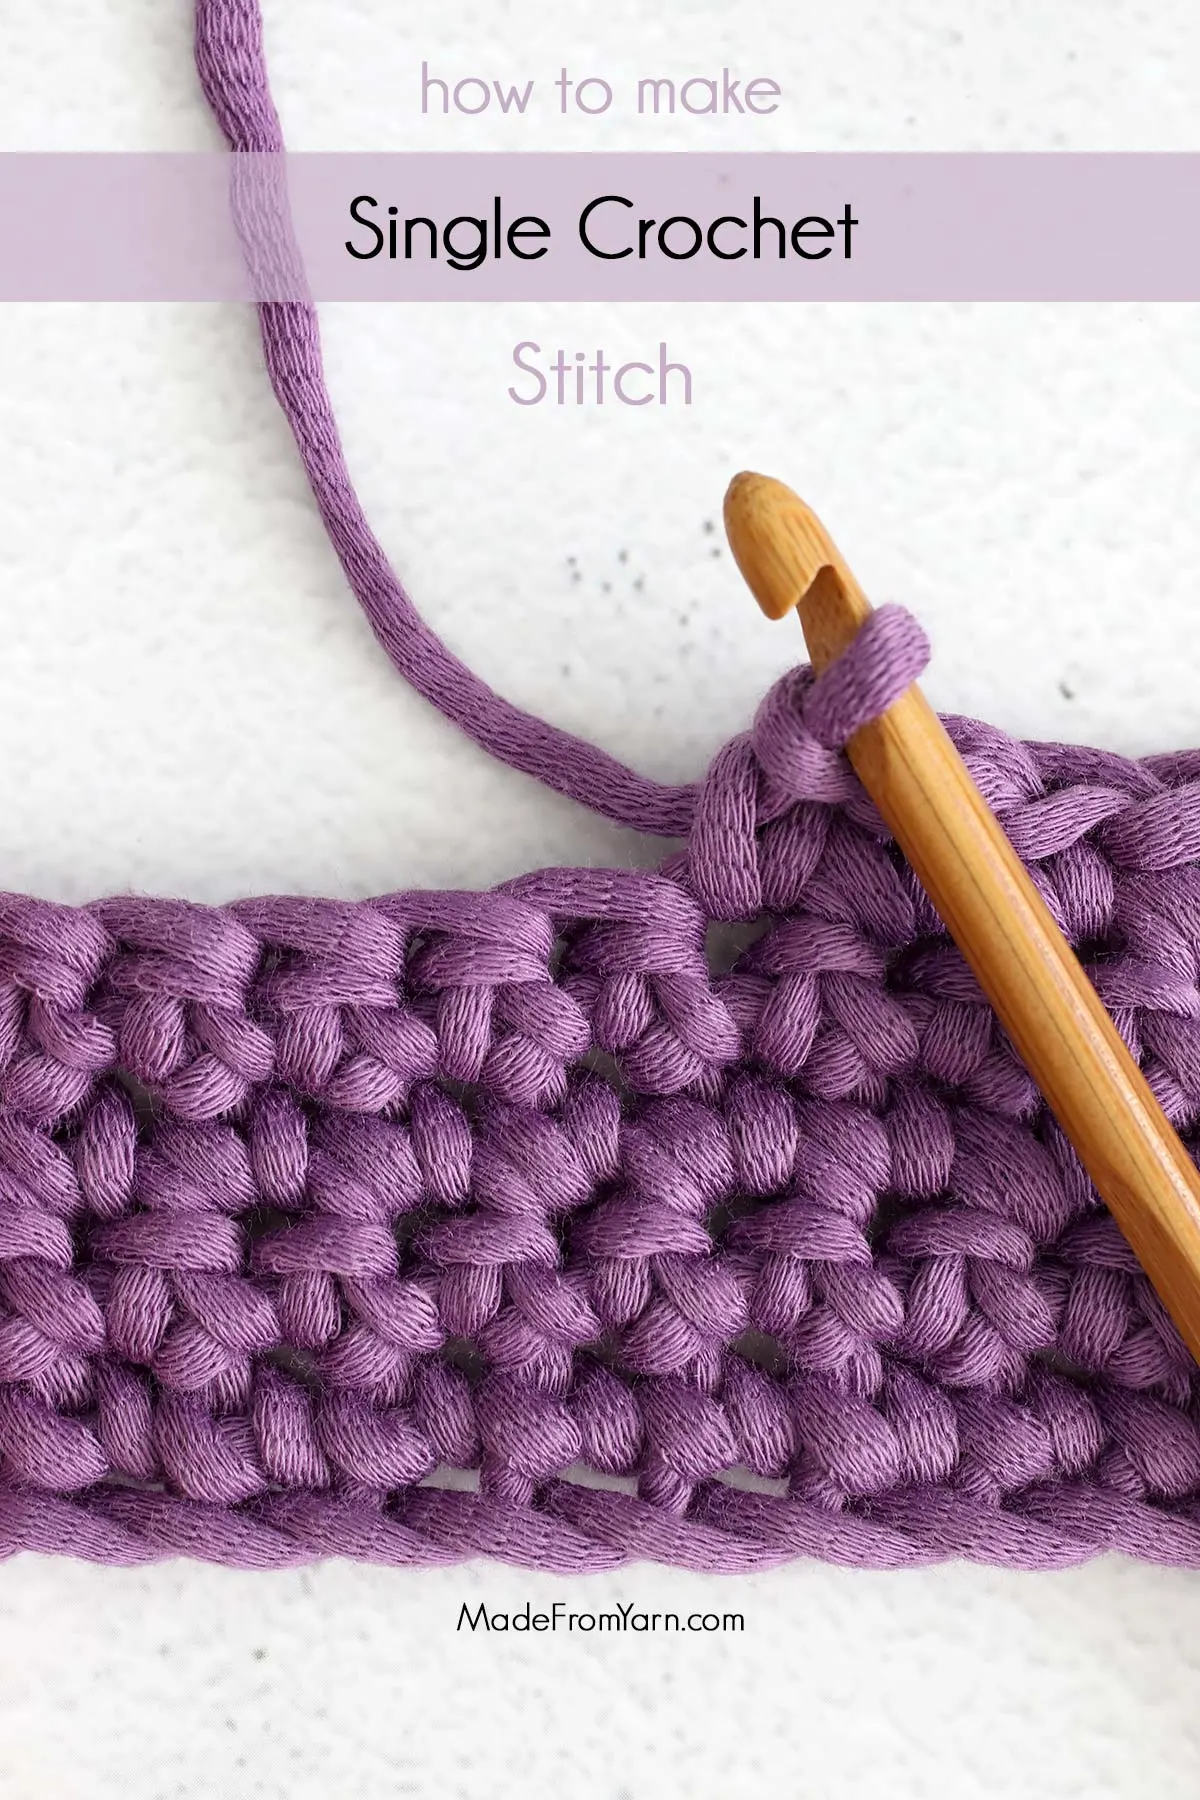 CROCHET FOR BEGINNERS: THE ULTIMATE QUICK & EASY STEP BY STEP GUIDE TO  MASTER THE CROCHET STITCHES & PATTERNS AT NO TIME!